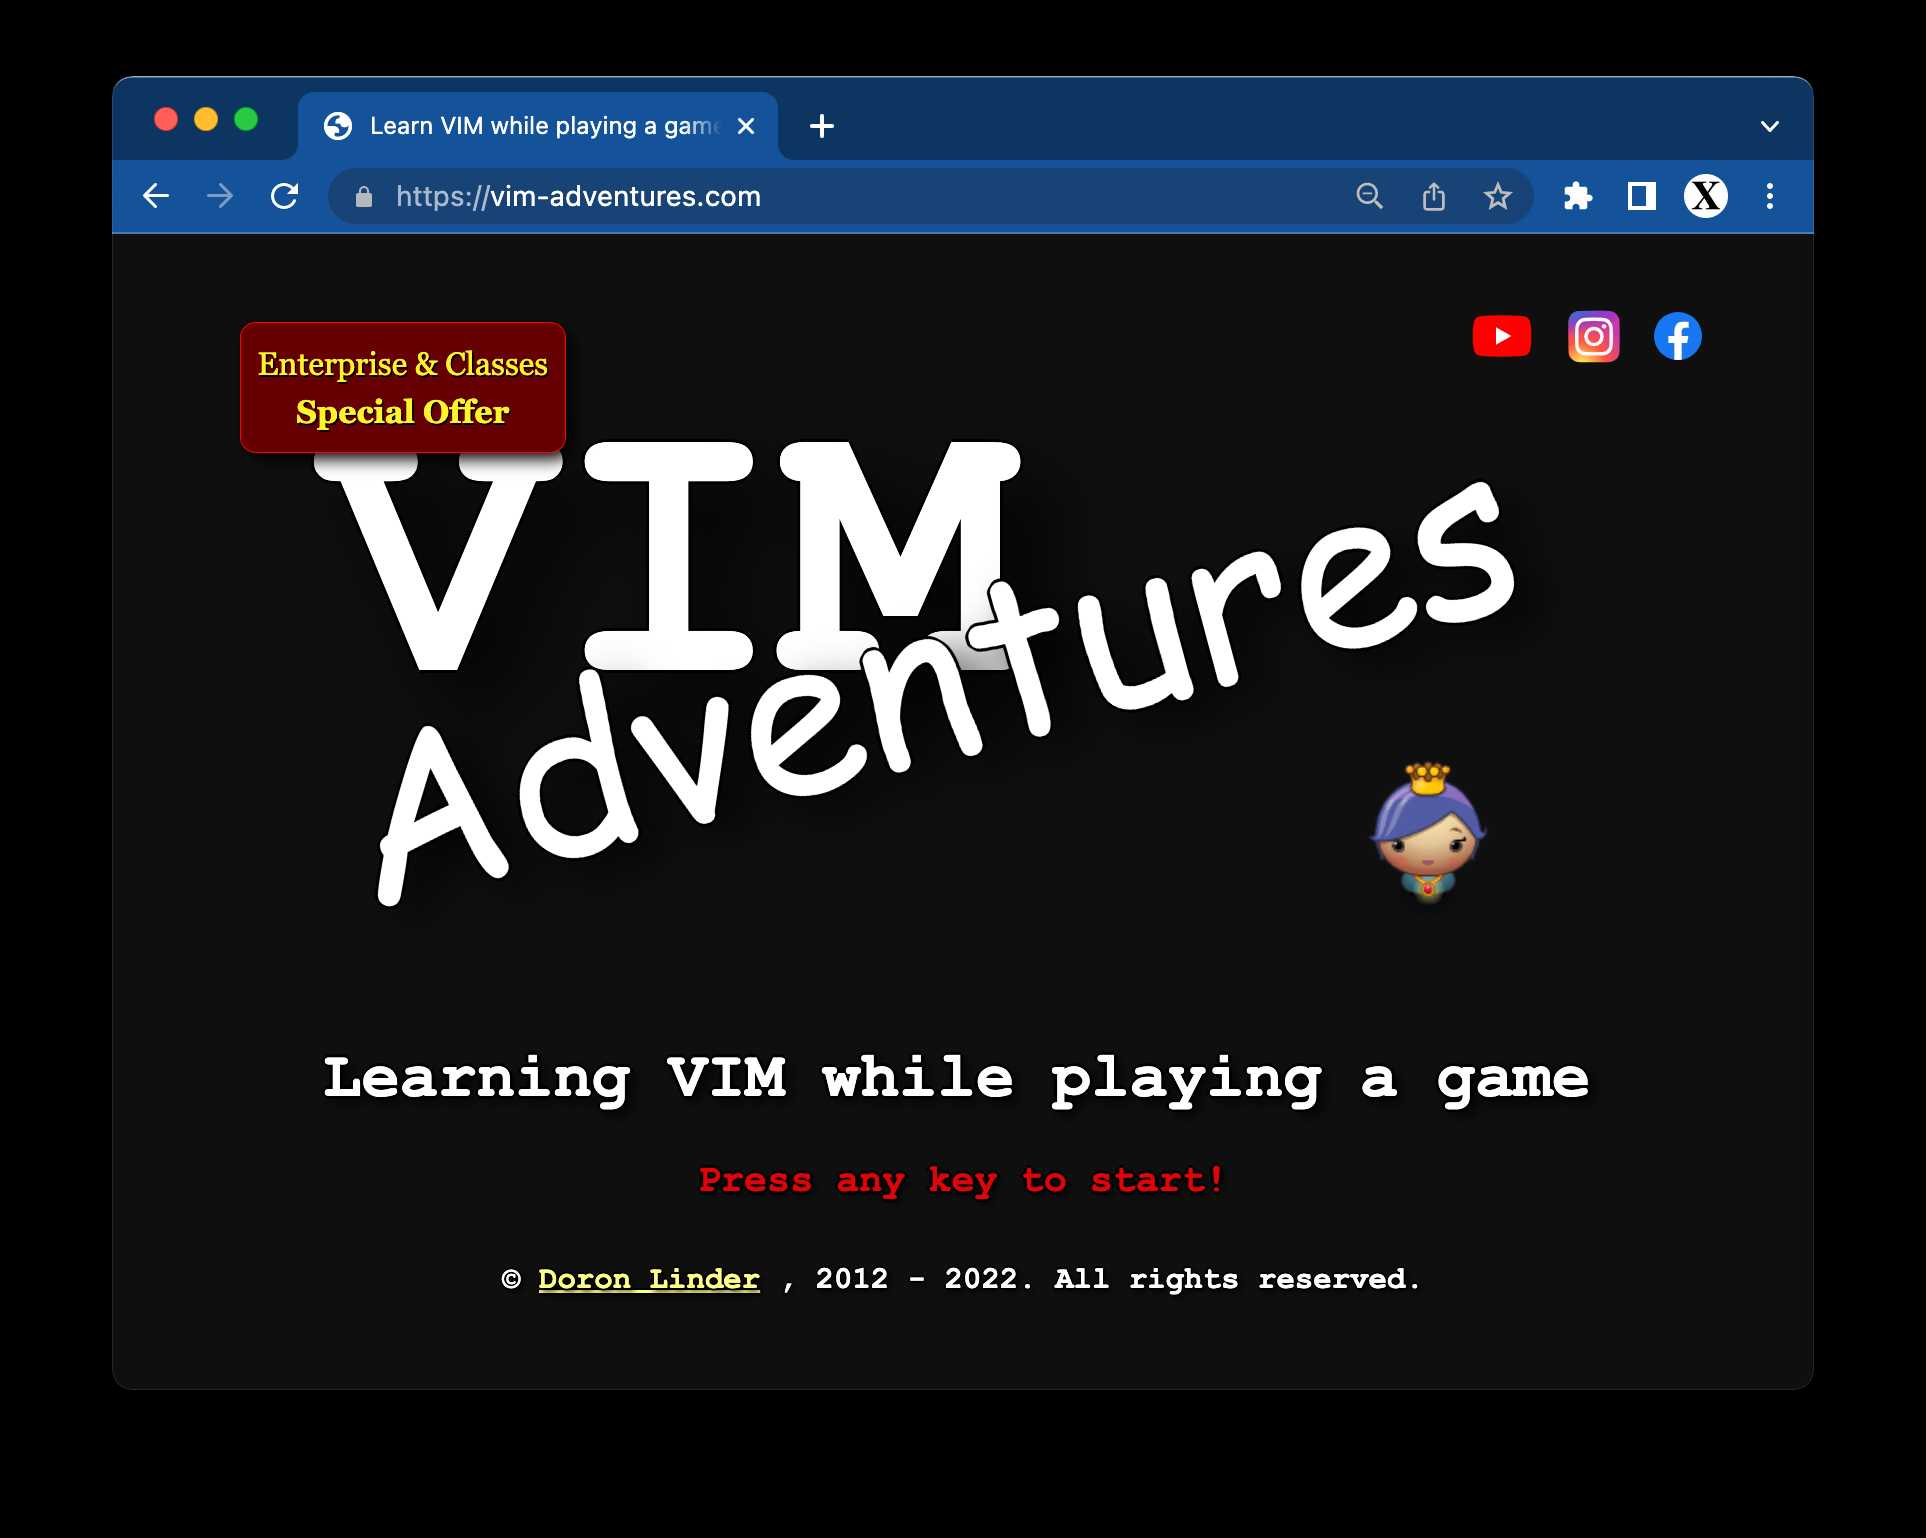 VIM Adventures - Learn VIM while playing a game